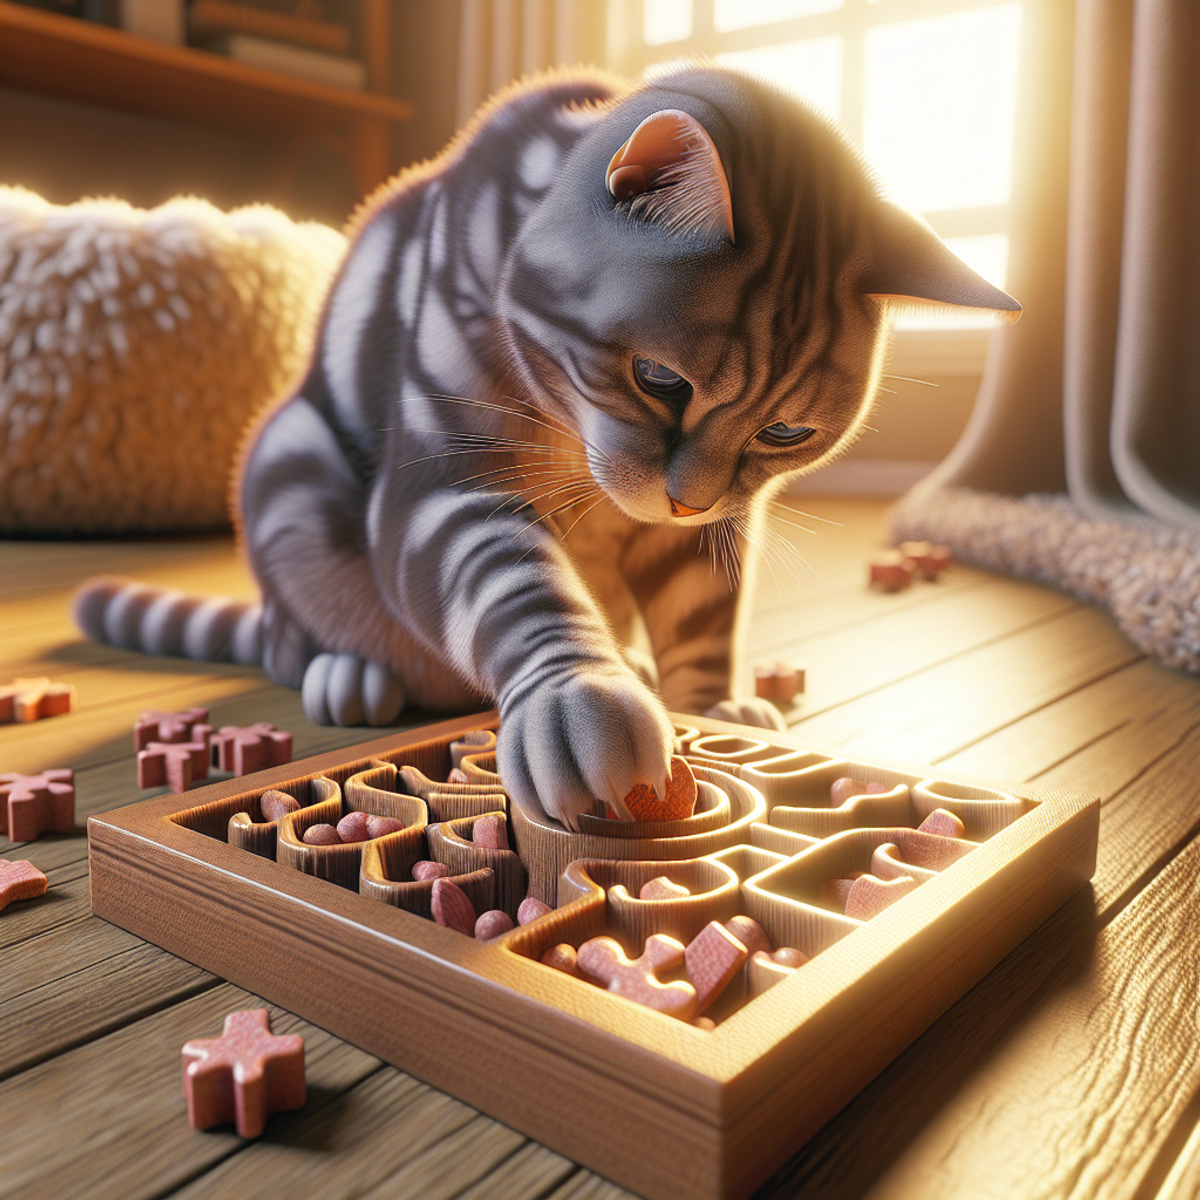 A senior gray tabby cat solving a puzzle toy filled with treats in a cozy sunlit room.